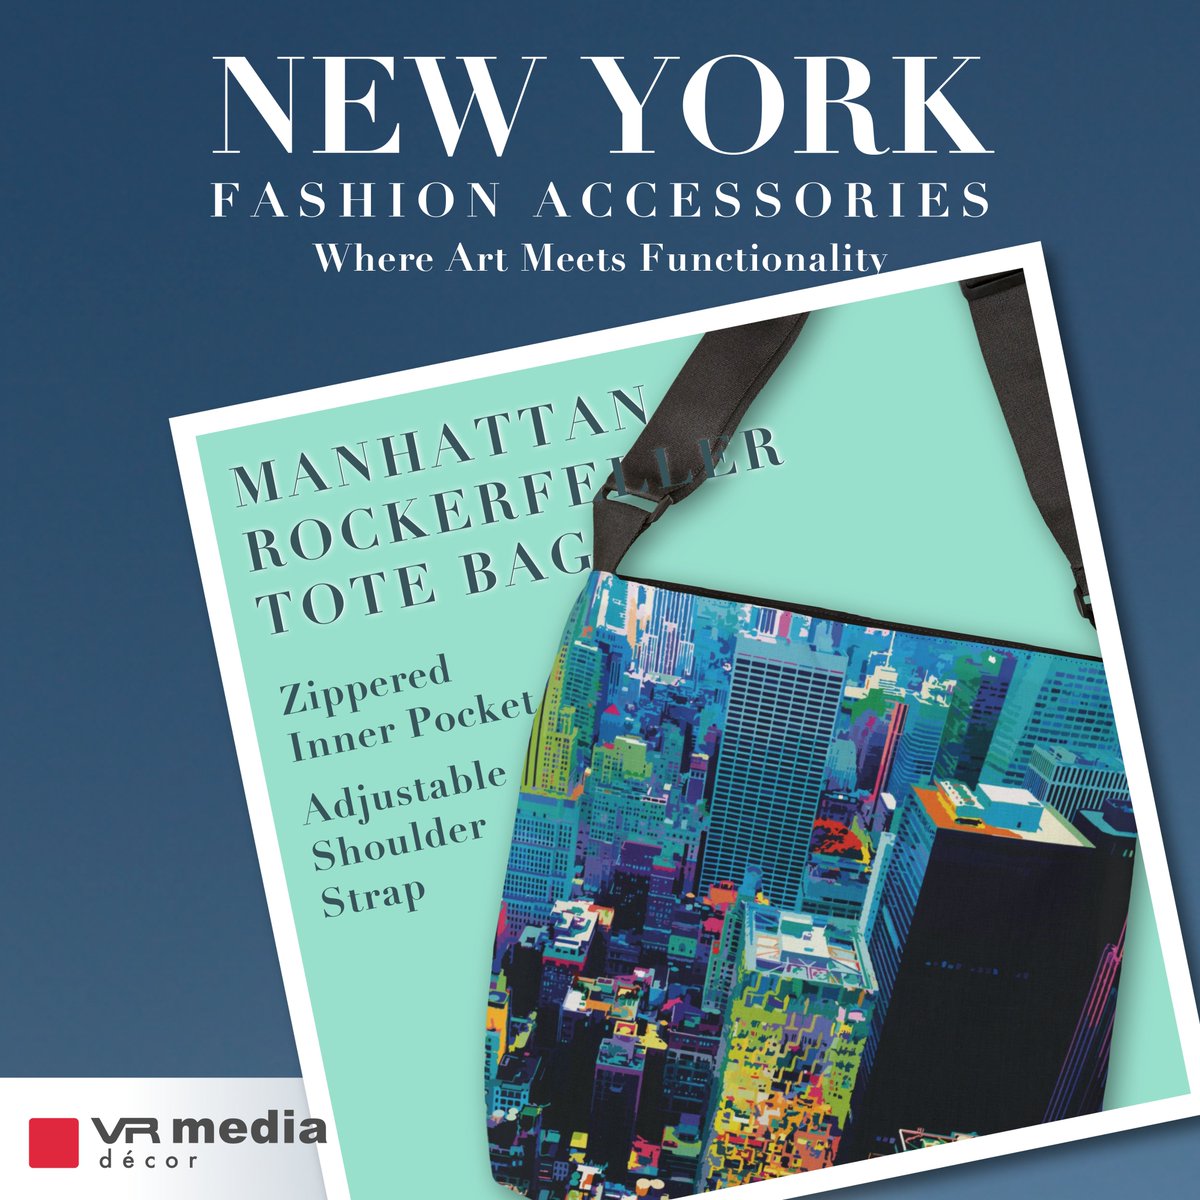 These are not your typical tote bags!
Experience the perfect blend of art and utility with our adjustable tote bags.
Shop Now
vrmediadecor.vrmedia.com.au/.../zippered-t…
#NYC #nycfashion #VRMediaDecorToteBags